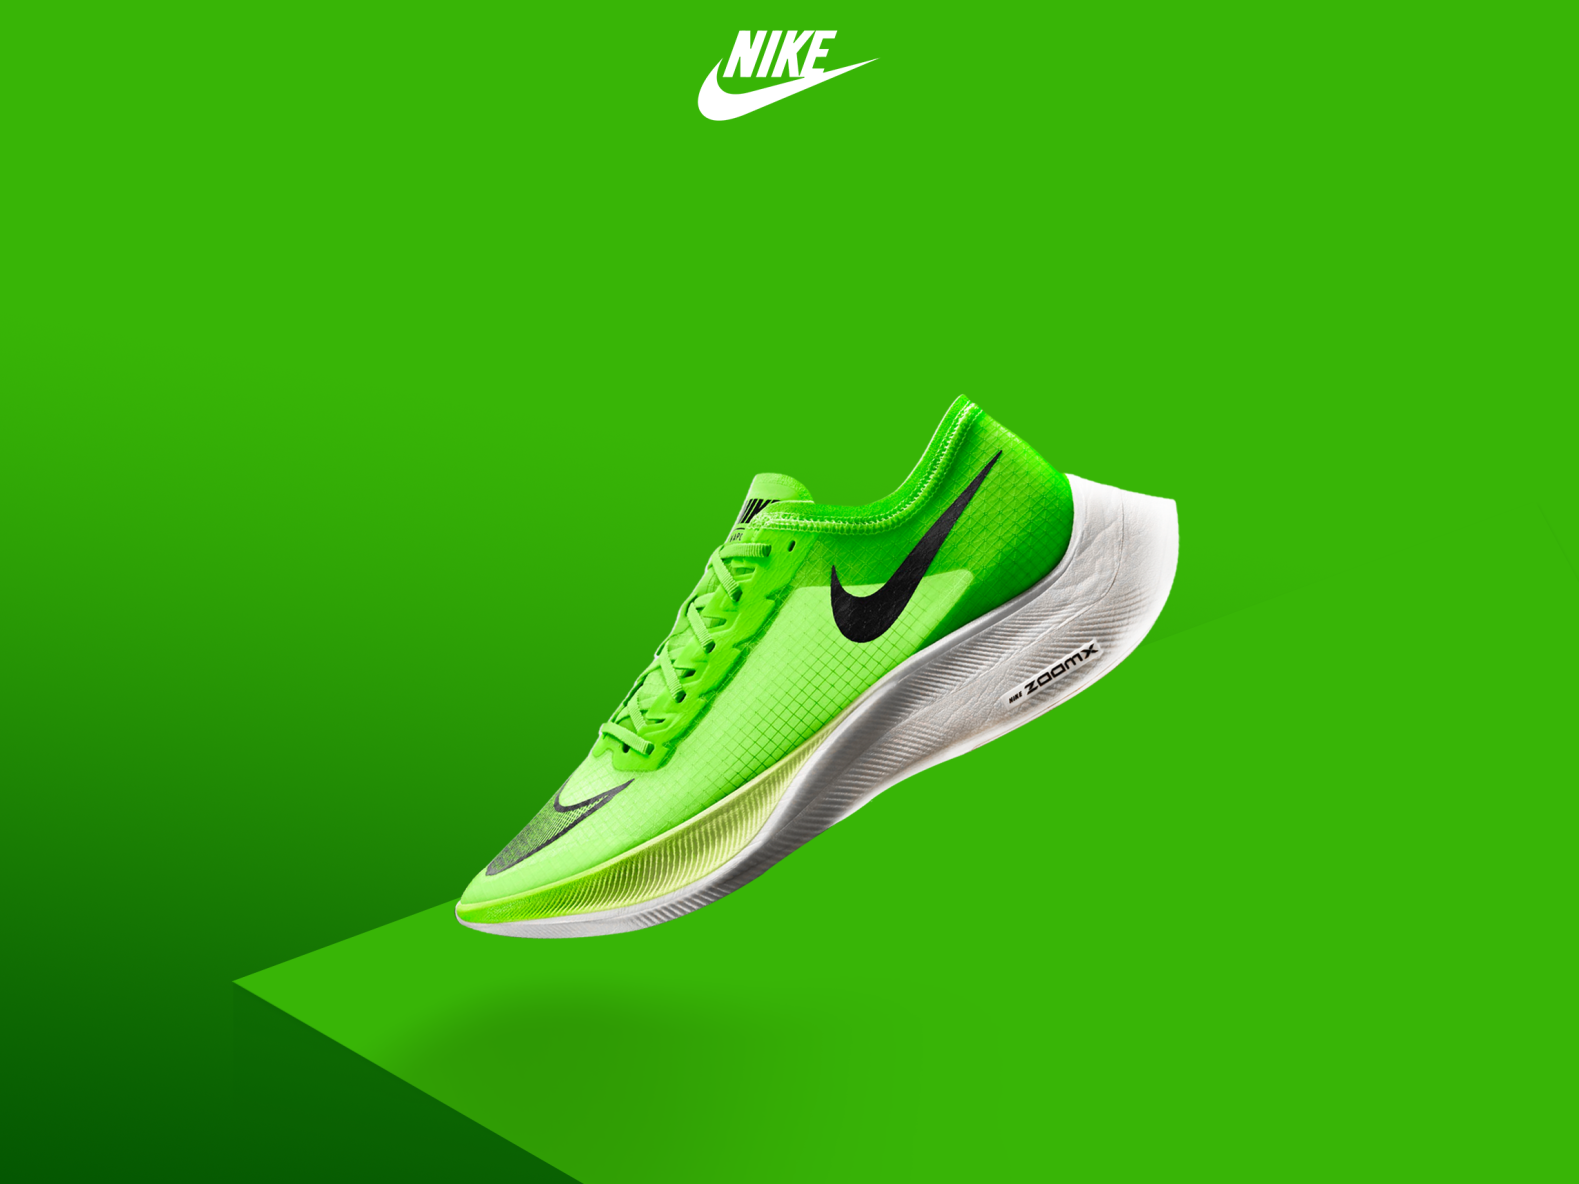 Nike Zoomx by Naveen Breno on Dribbble